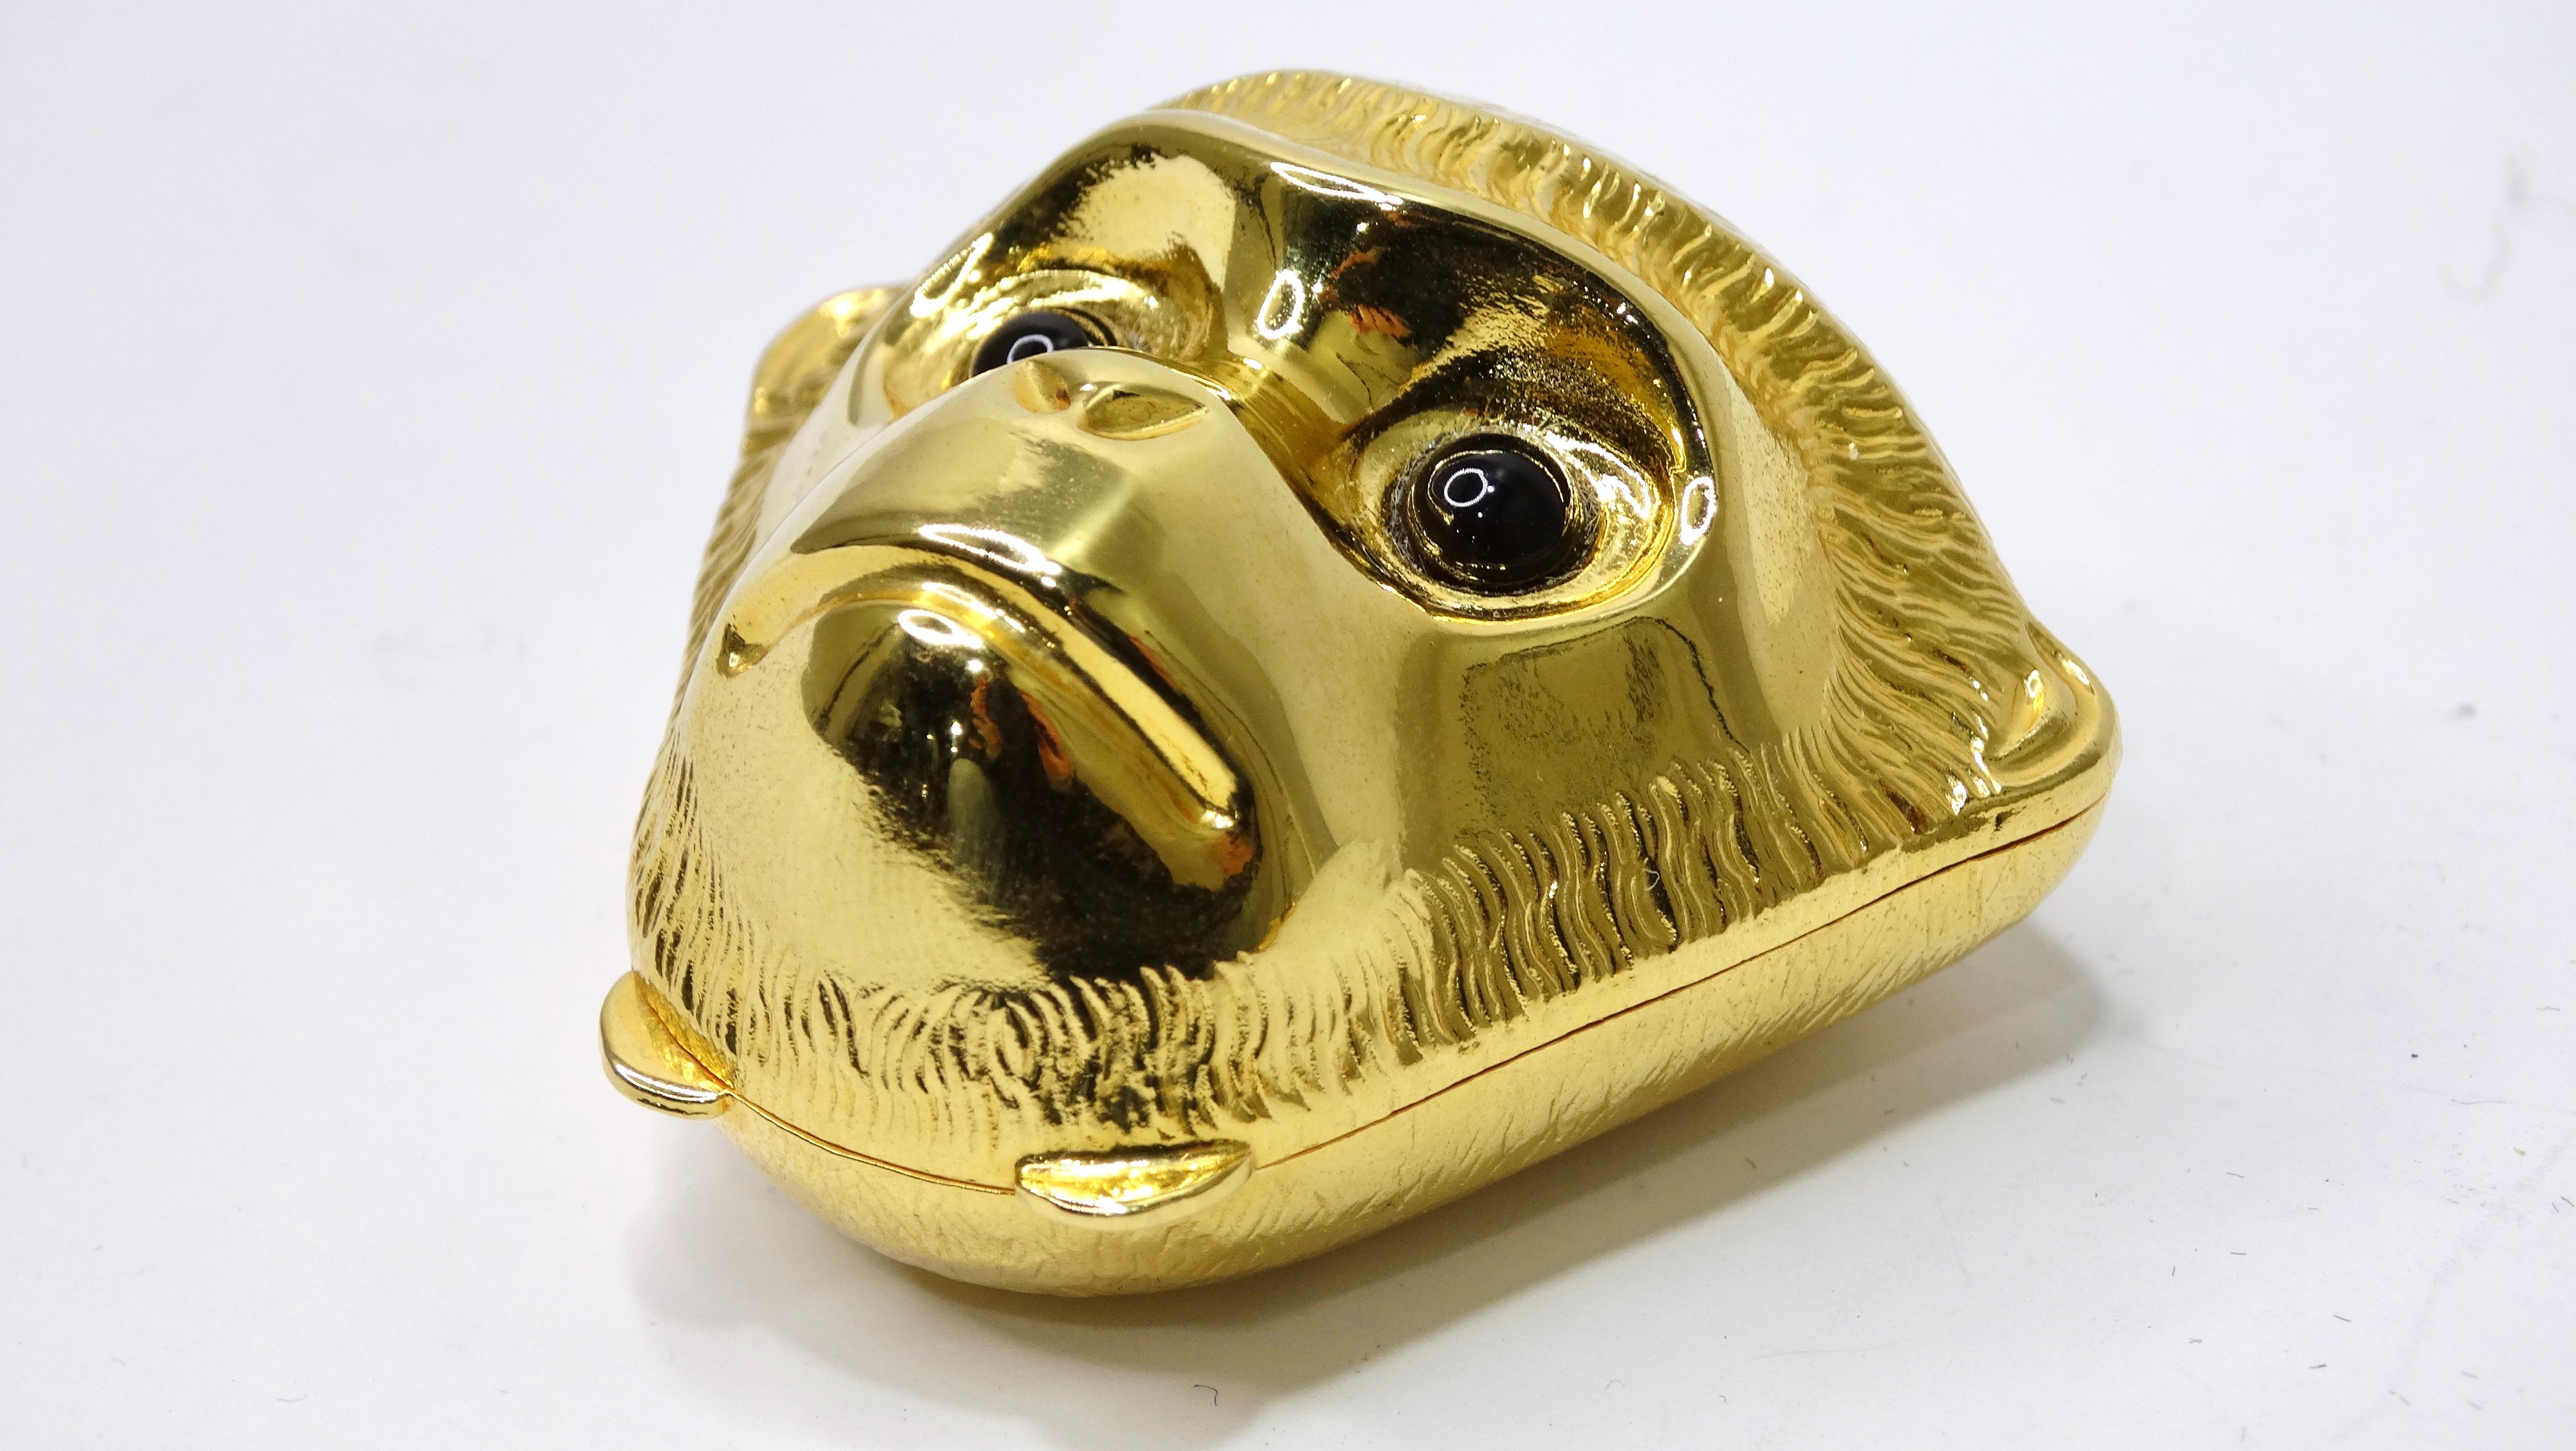 This is the most adorable monkey themed trinket pill box by none other than Judith Leiber! Add a little fun to your daily life and keep this in your bag to keep small items in! It's the little luxuries in life that really make it special. Pair this